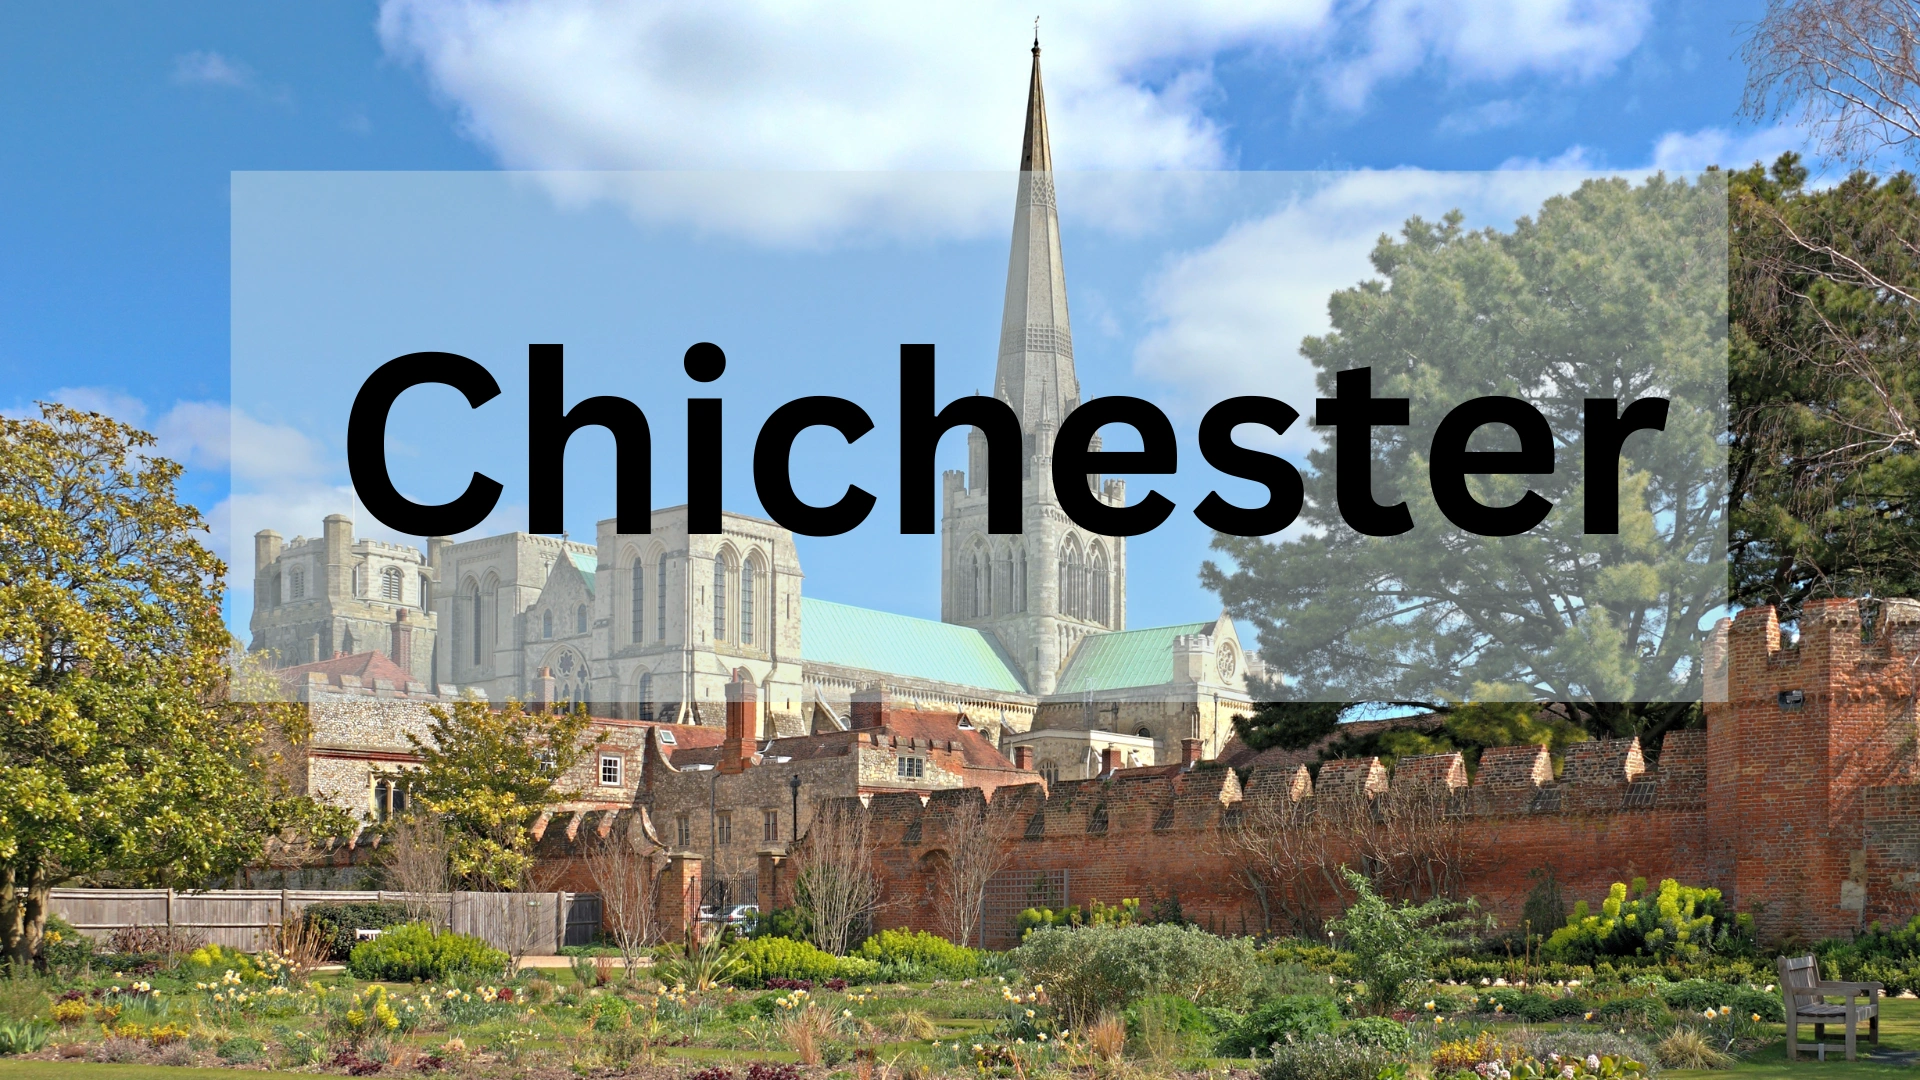 Chichester: A Scenic Journey with Vacationwaits